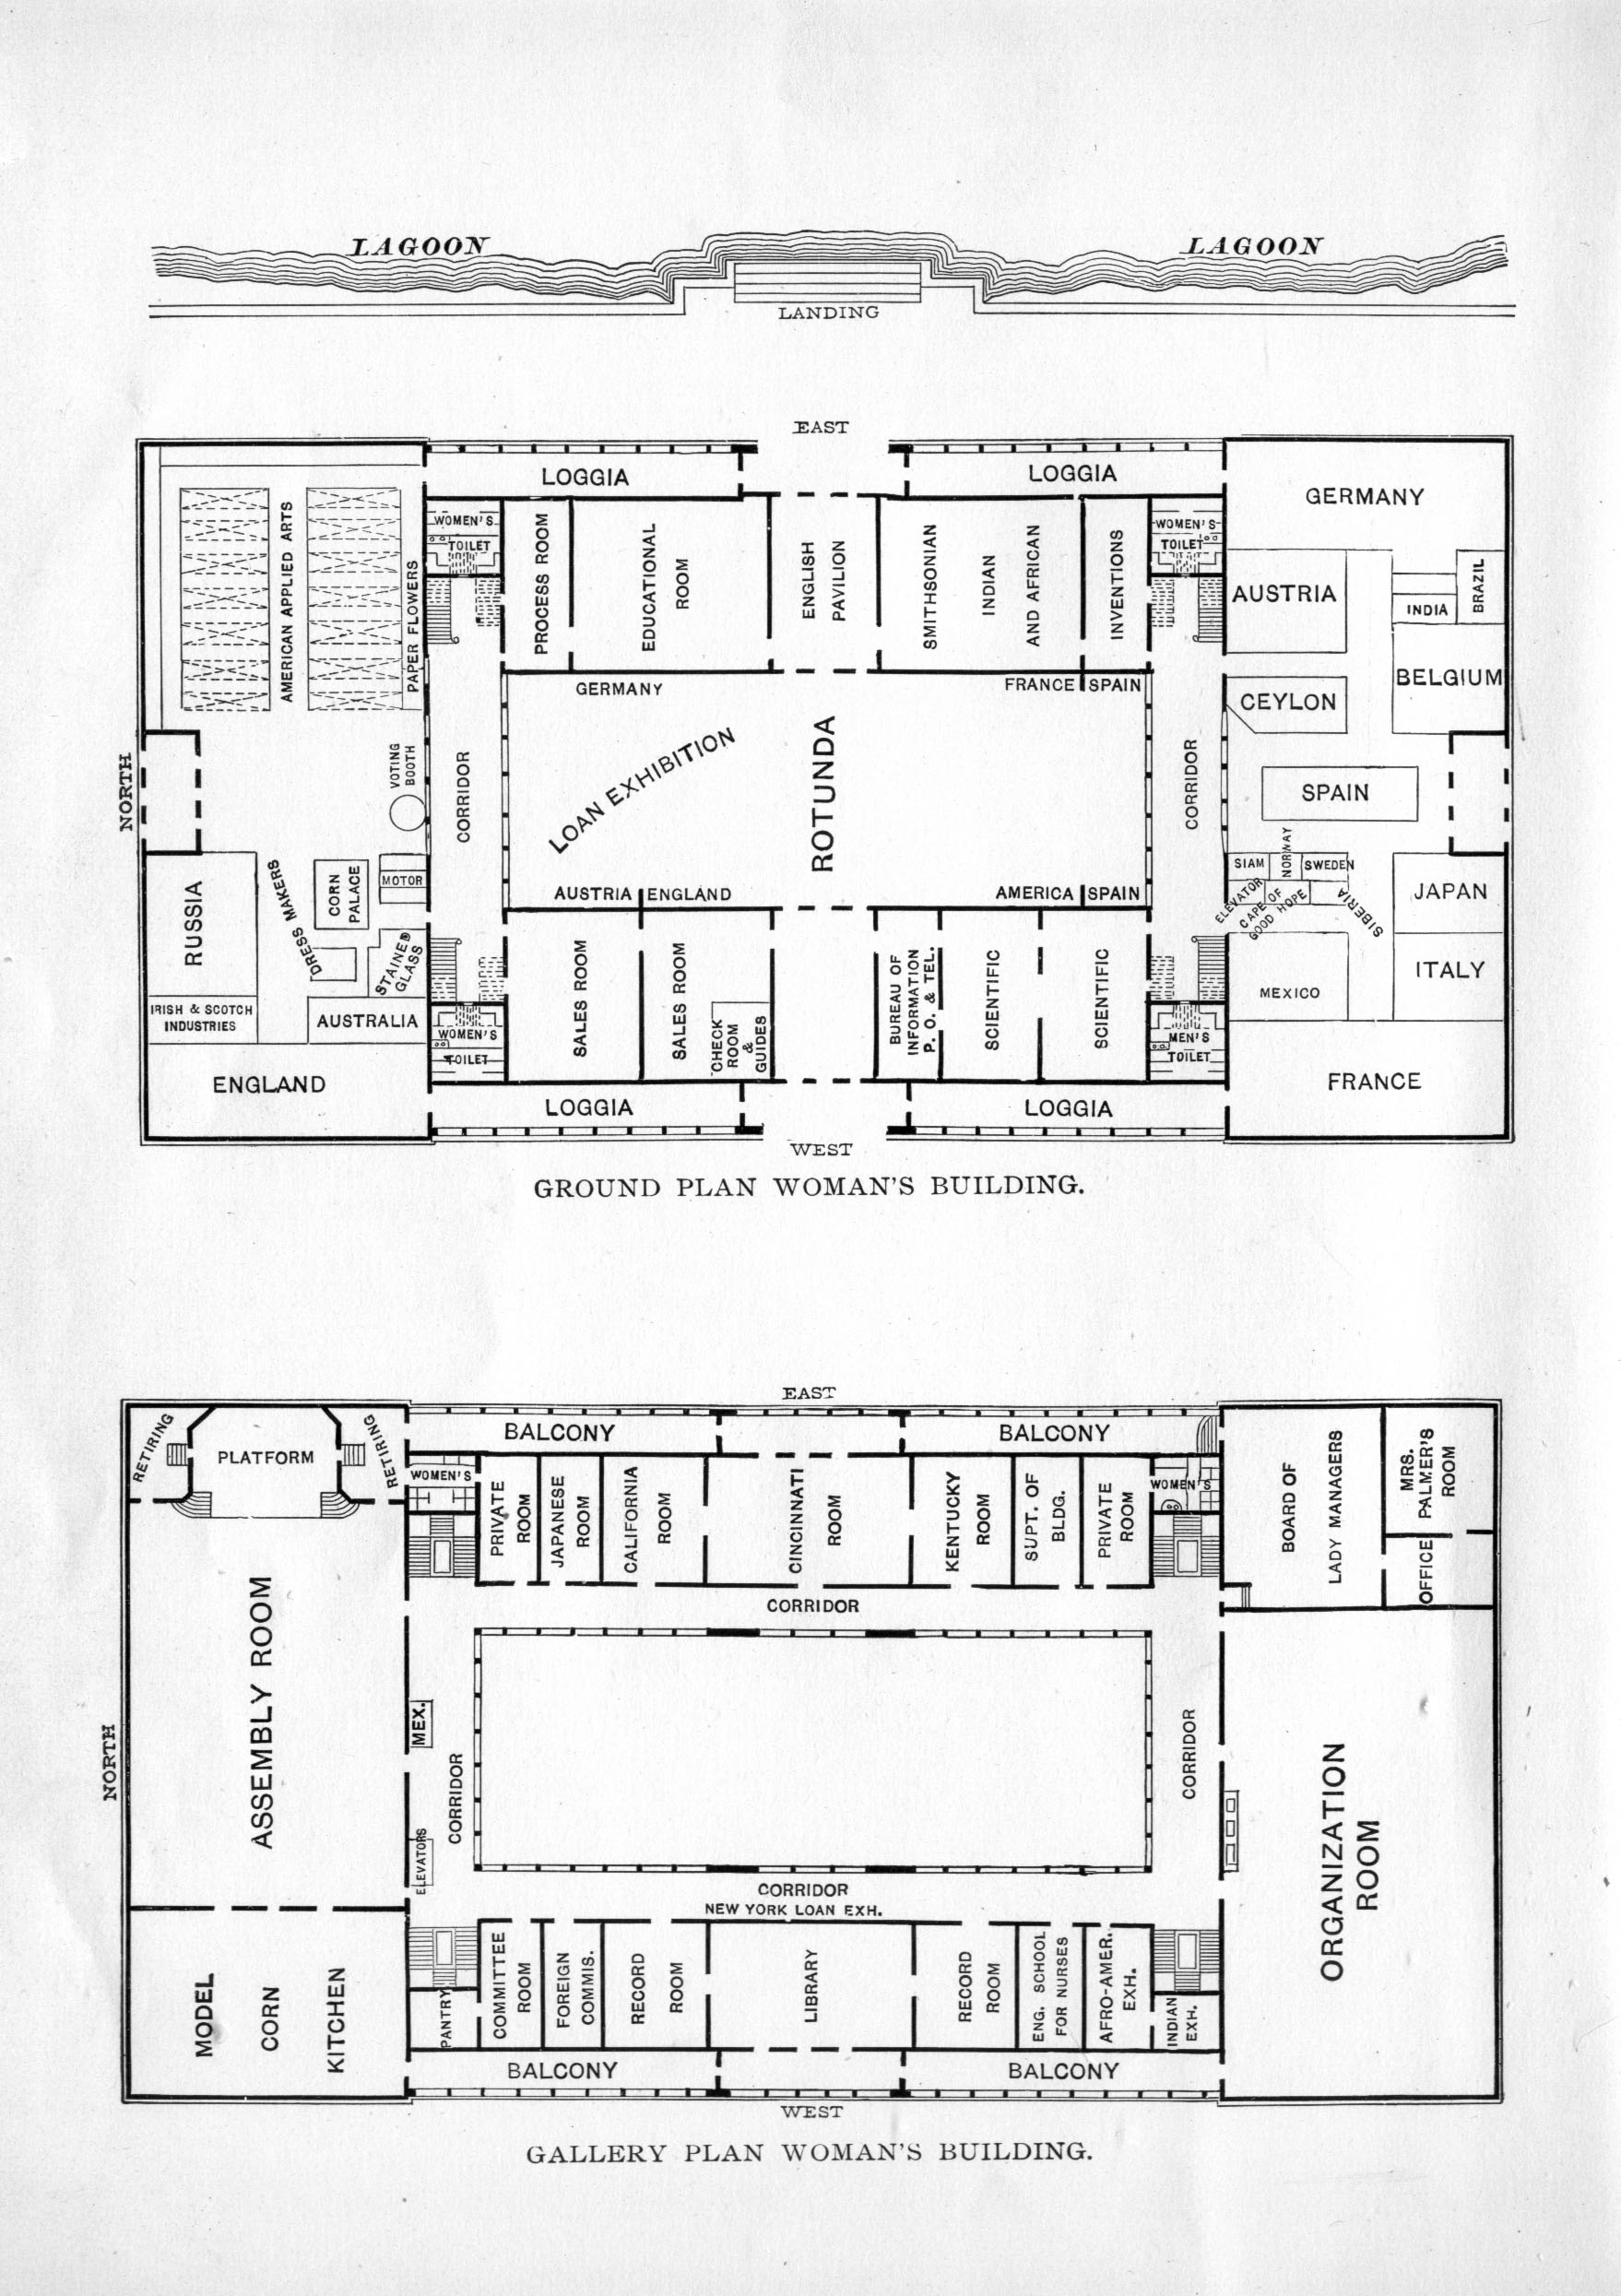 floor plans of the ground and gallery floors of the woman's building